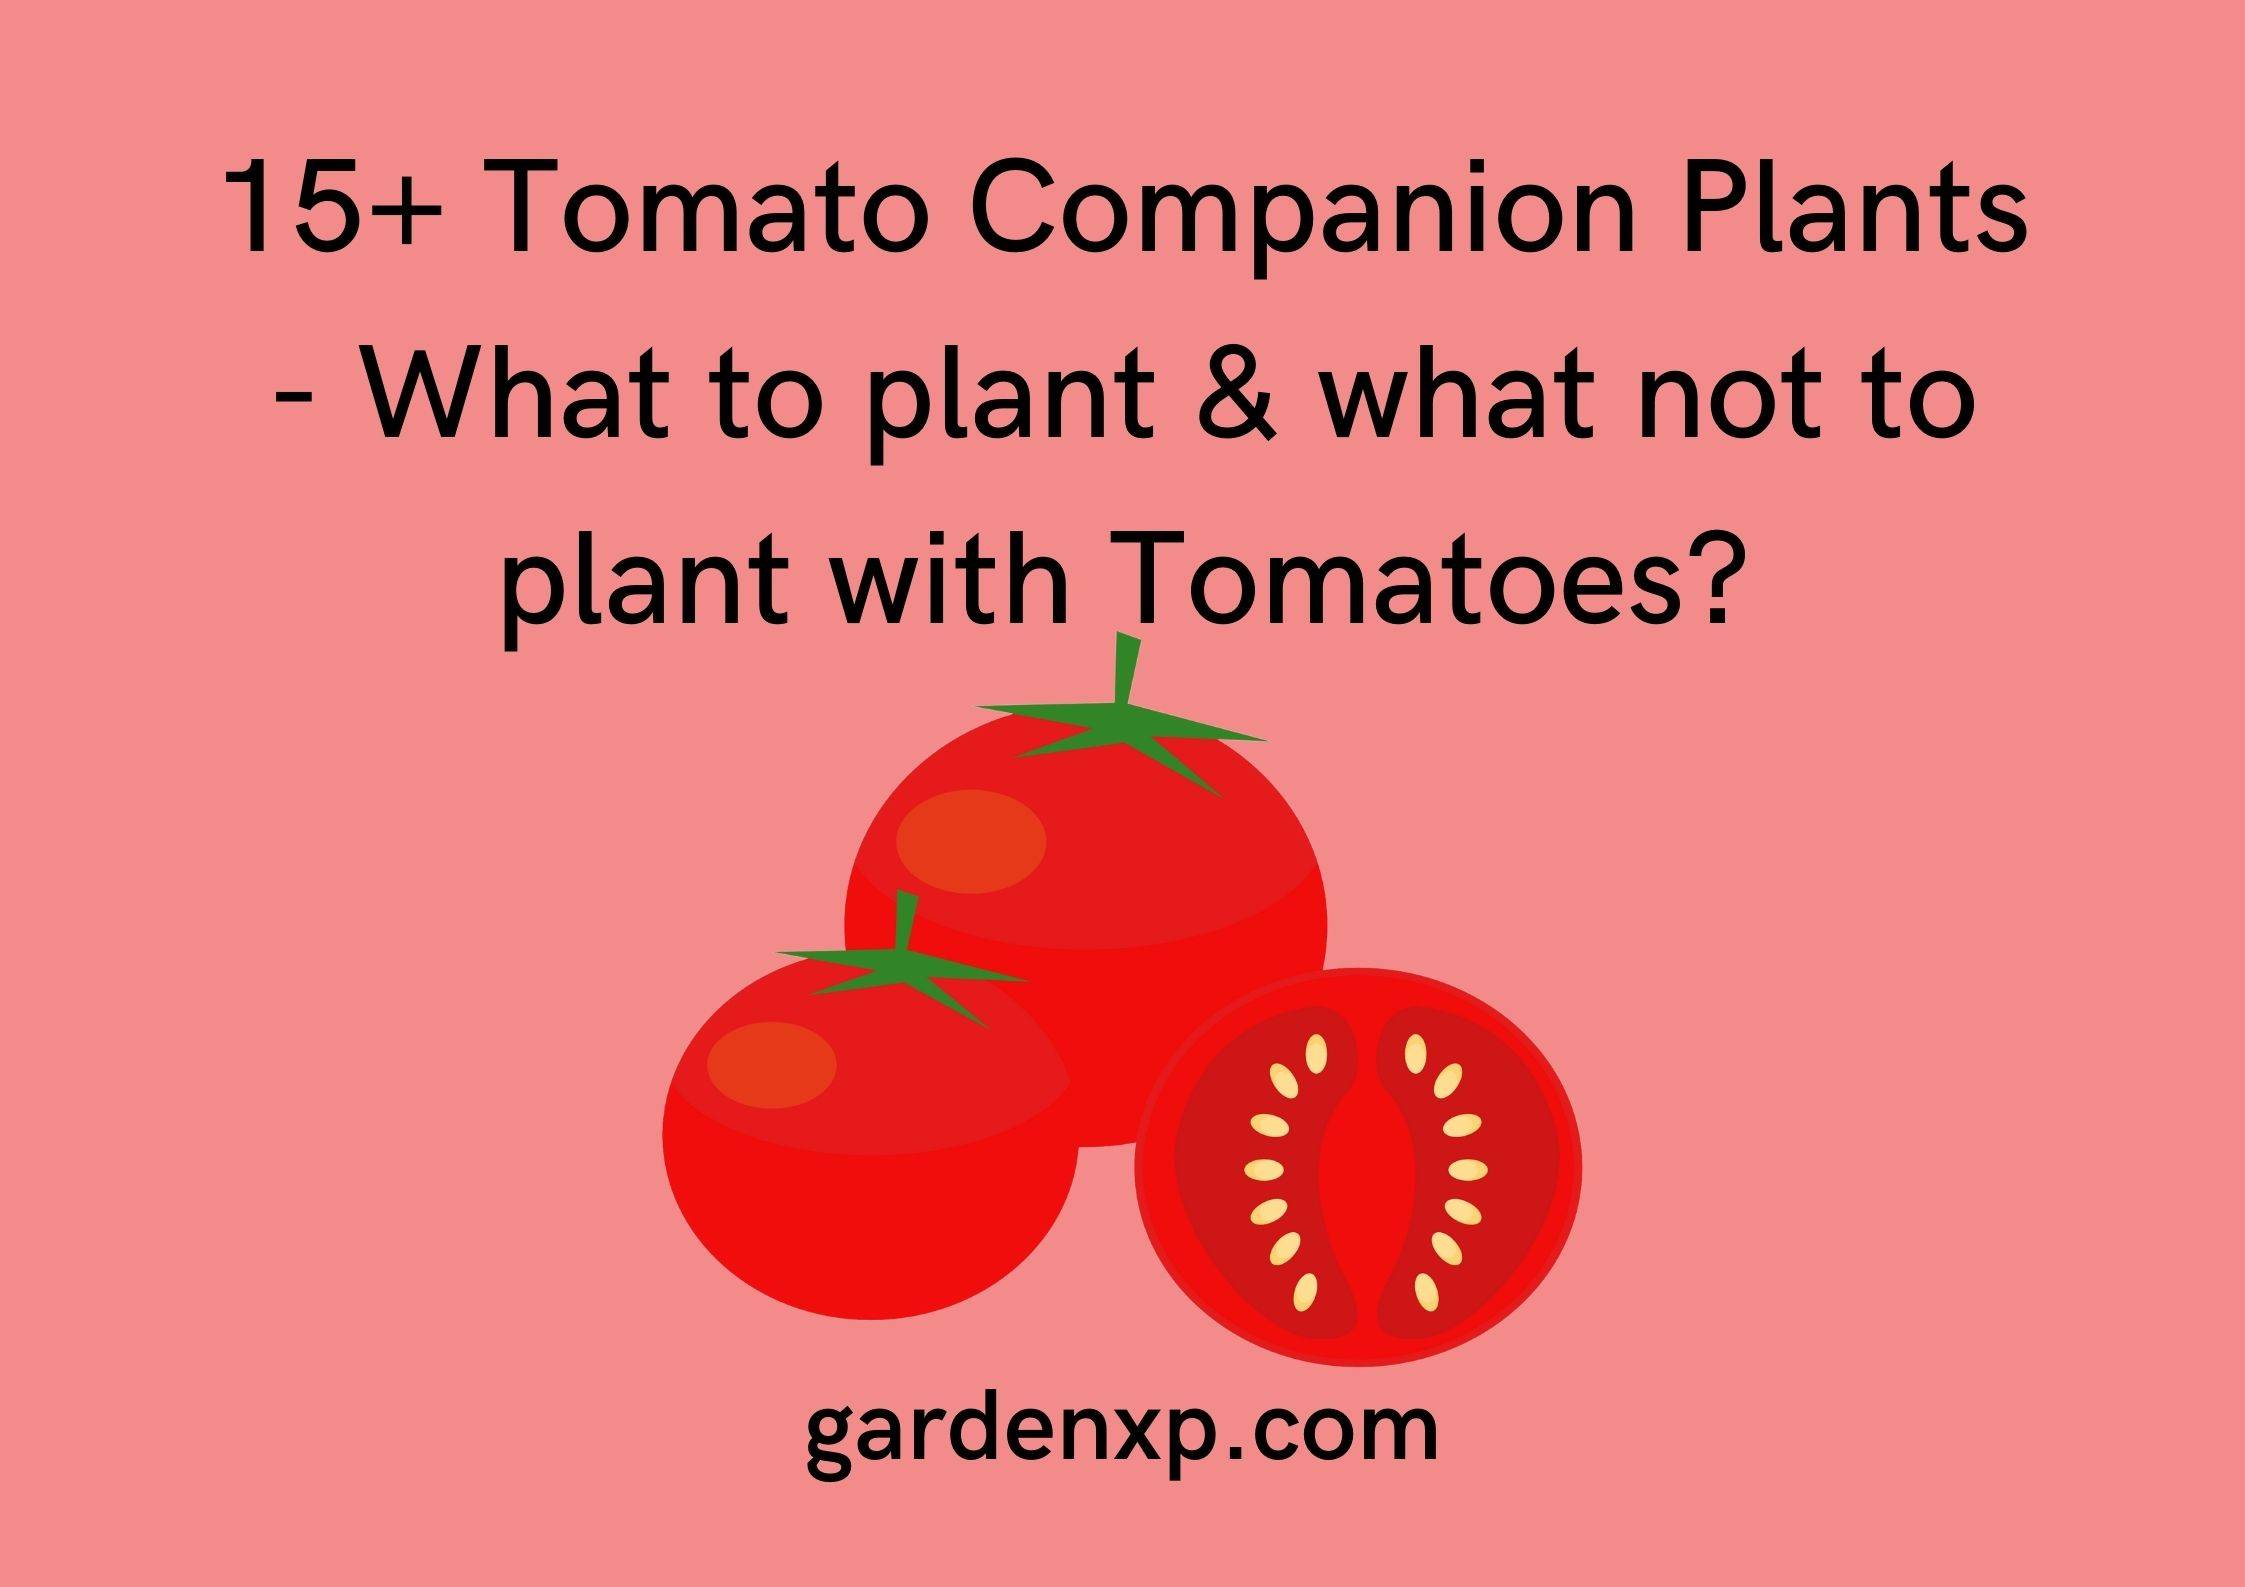 15+ Tomato Companion Plants - What to plant & what not to plant with Tomatoes?